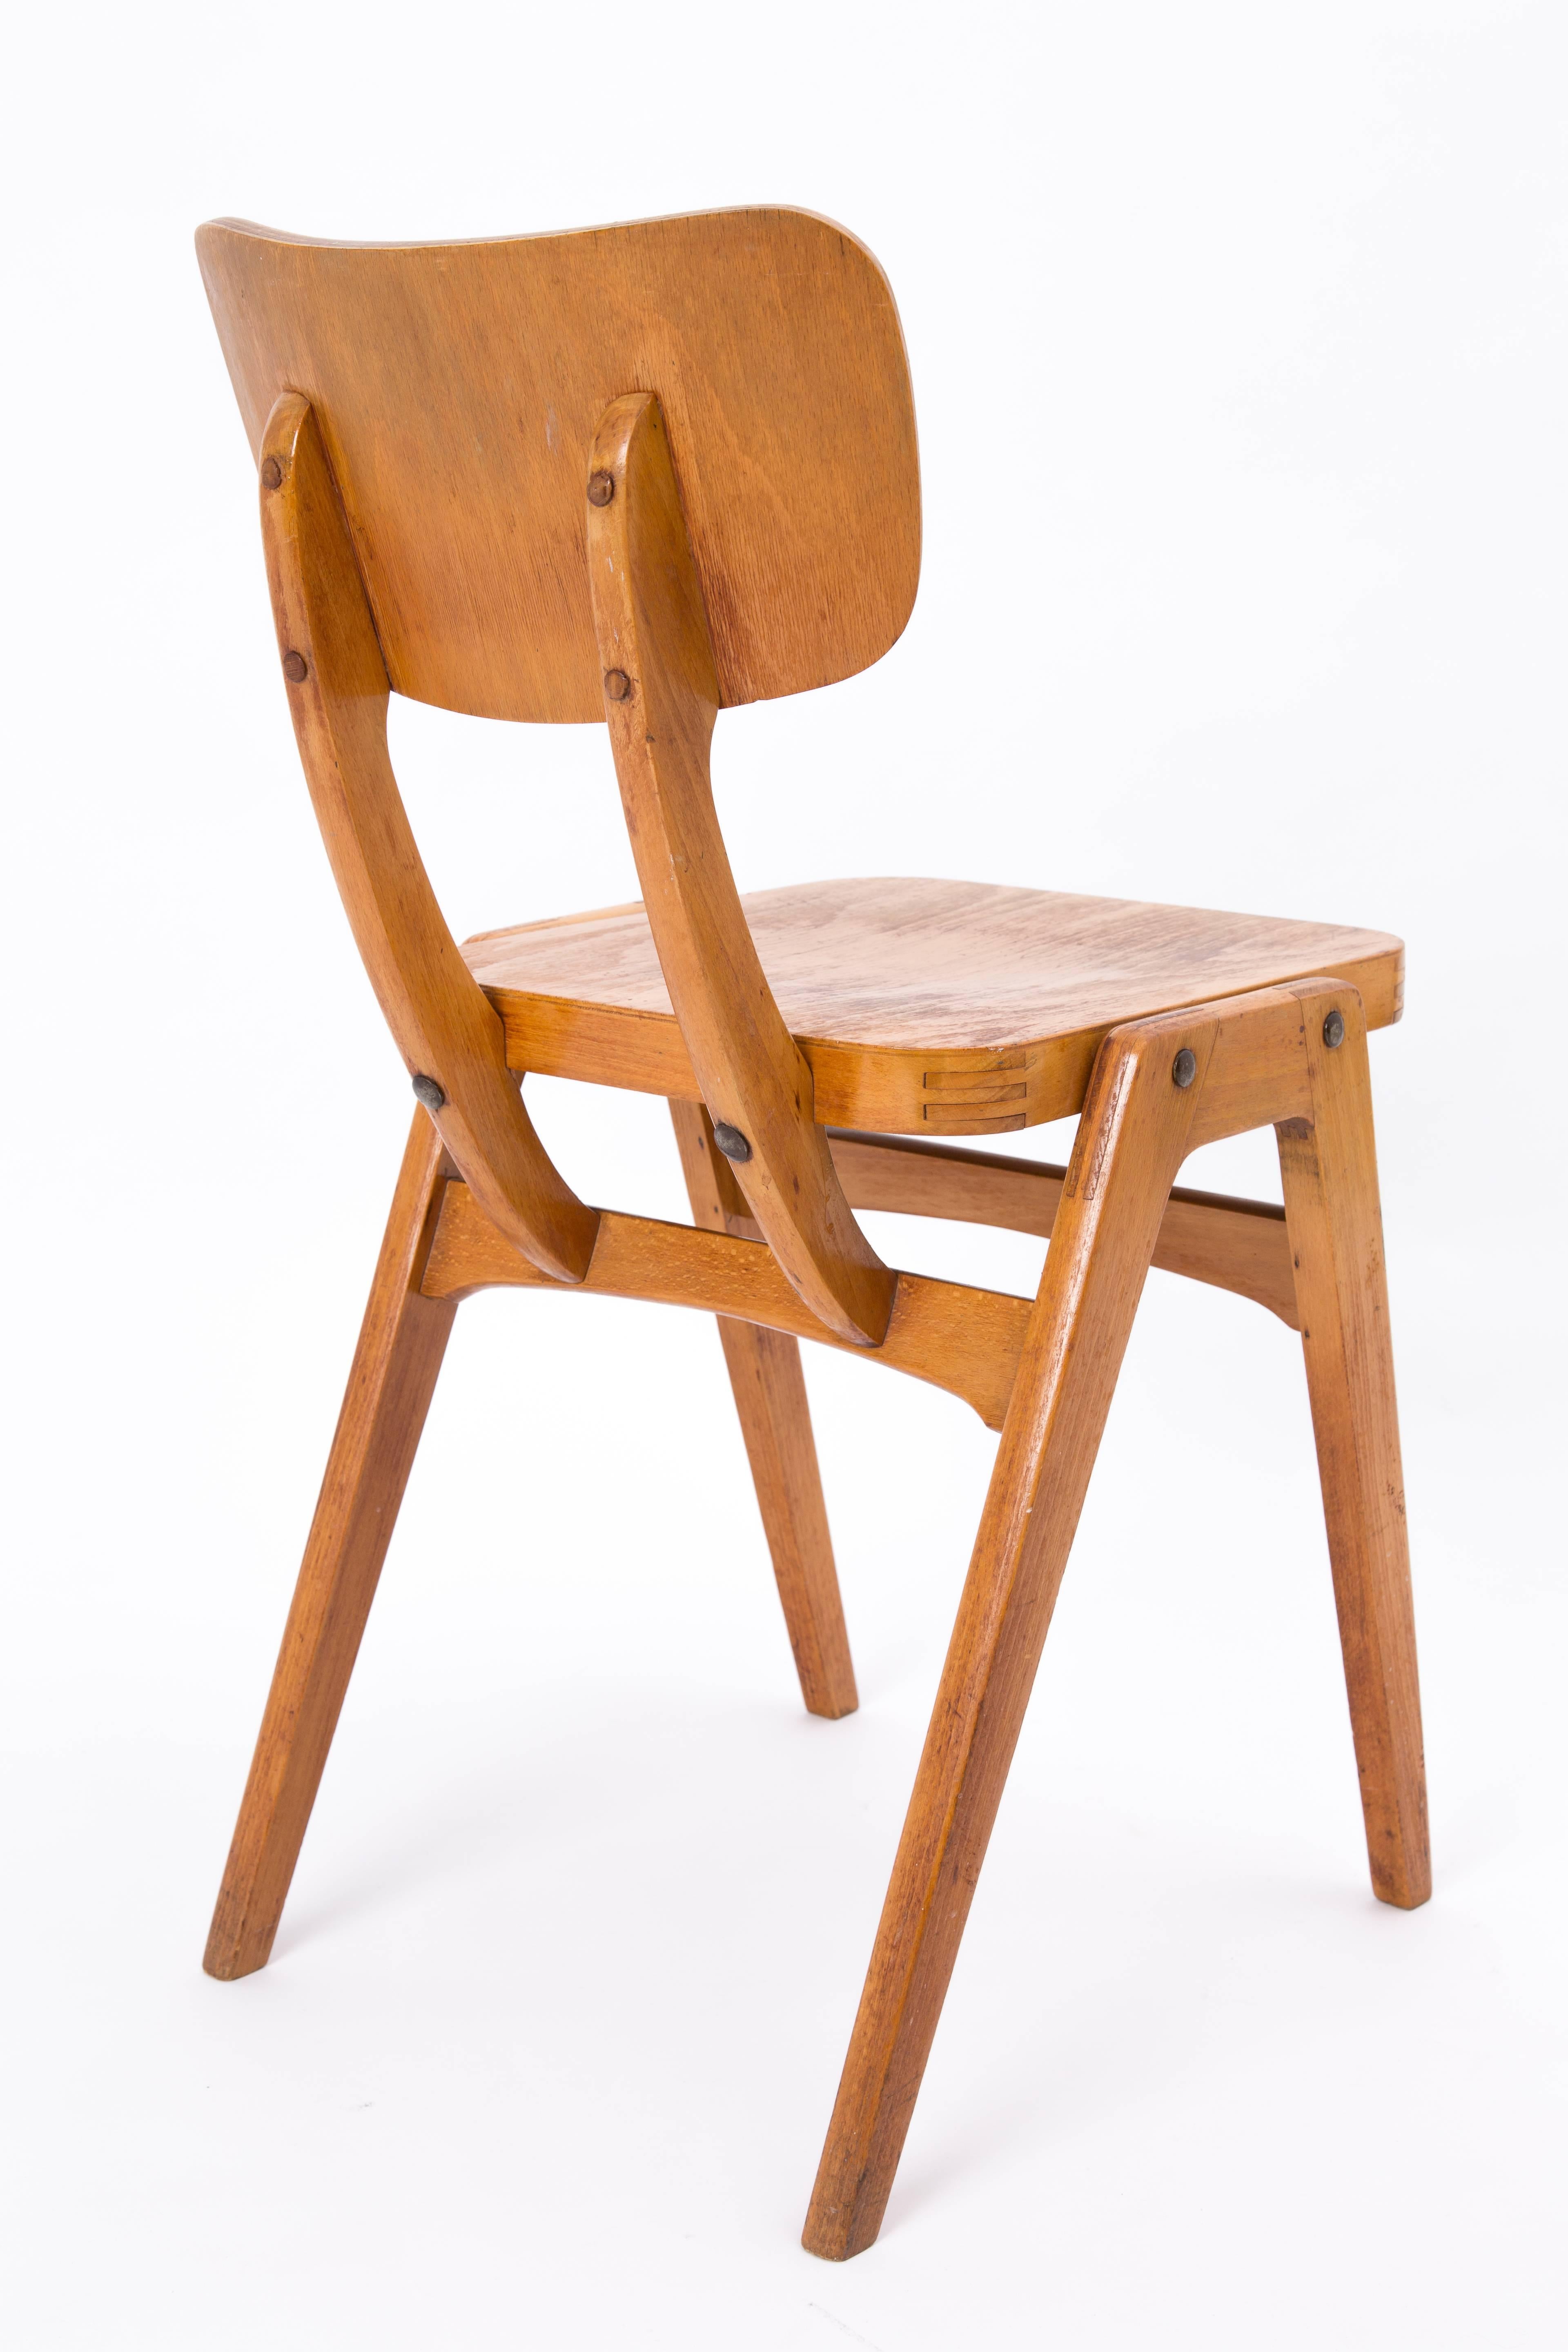 Polish Wood Construction Childrens Chair Plywood